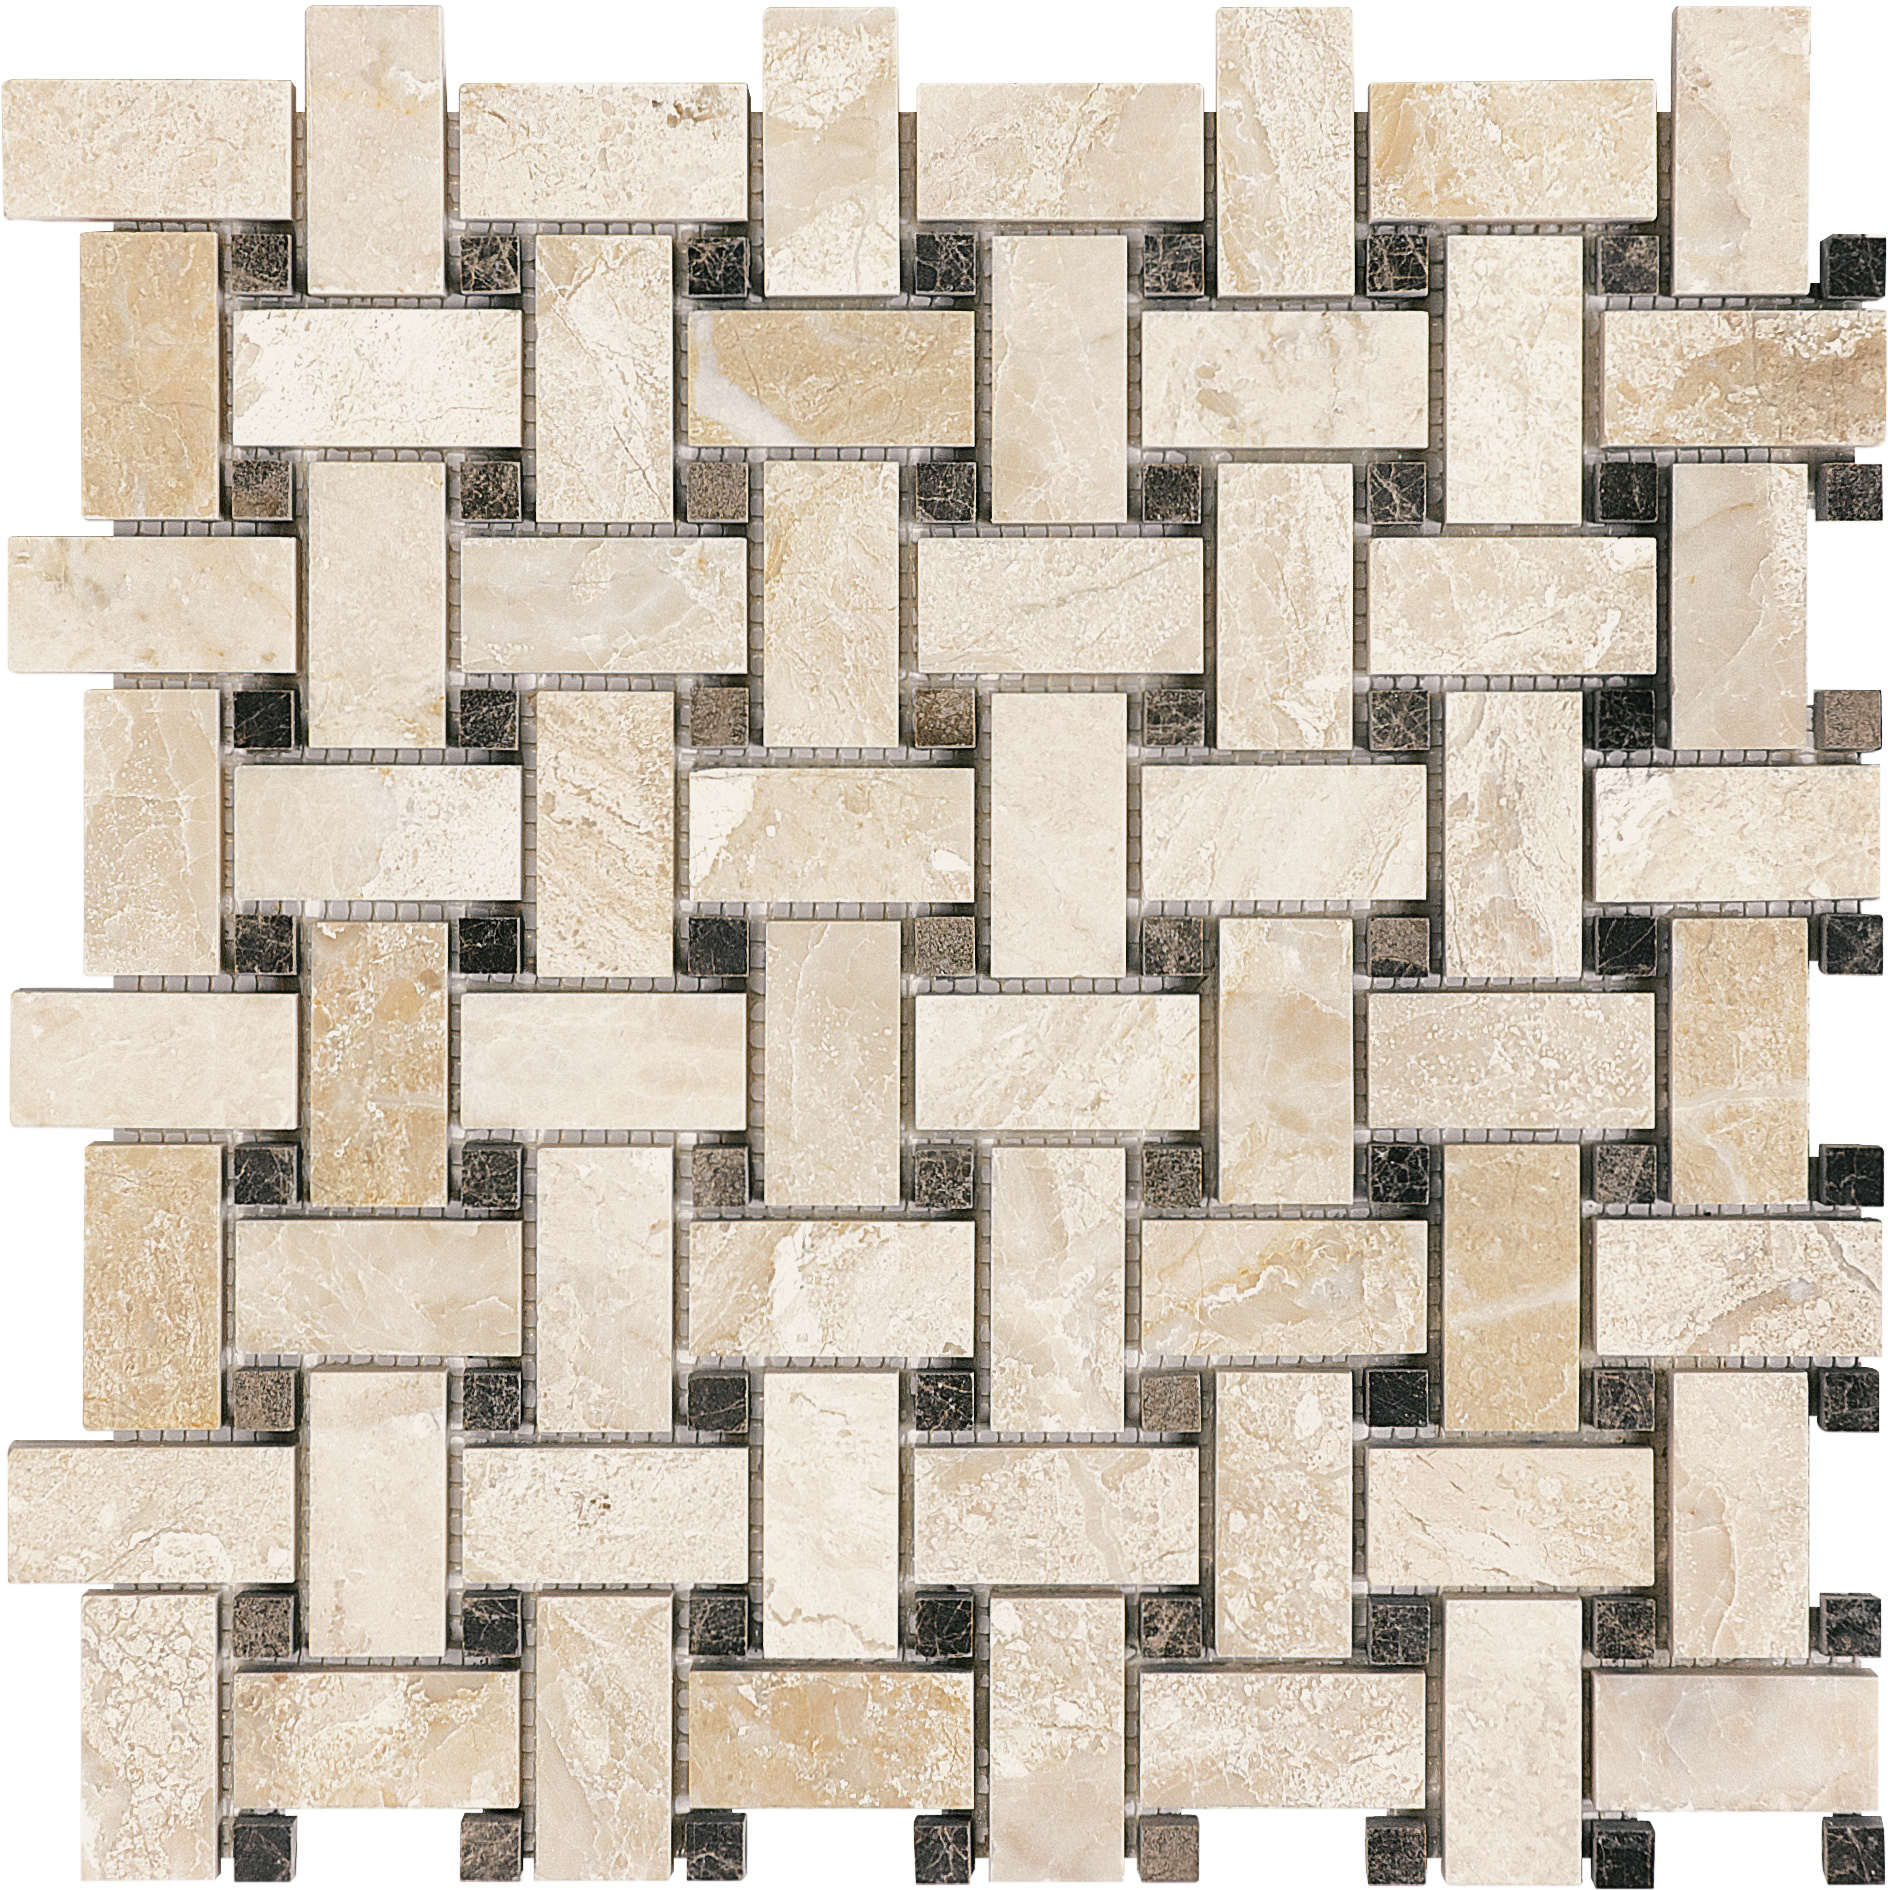 marble basketweave 2x2-inch pattern natural stone mosaic from impero reale anatolia collection distributed by surface group international polished finish straight edge edge mesh shape